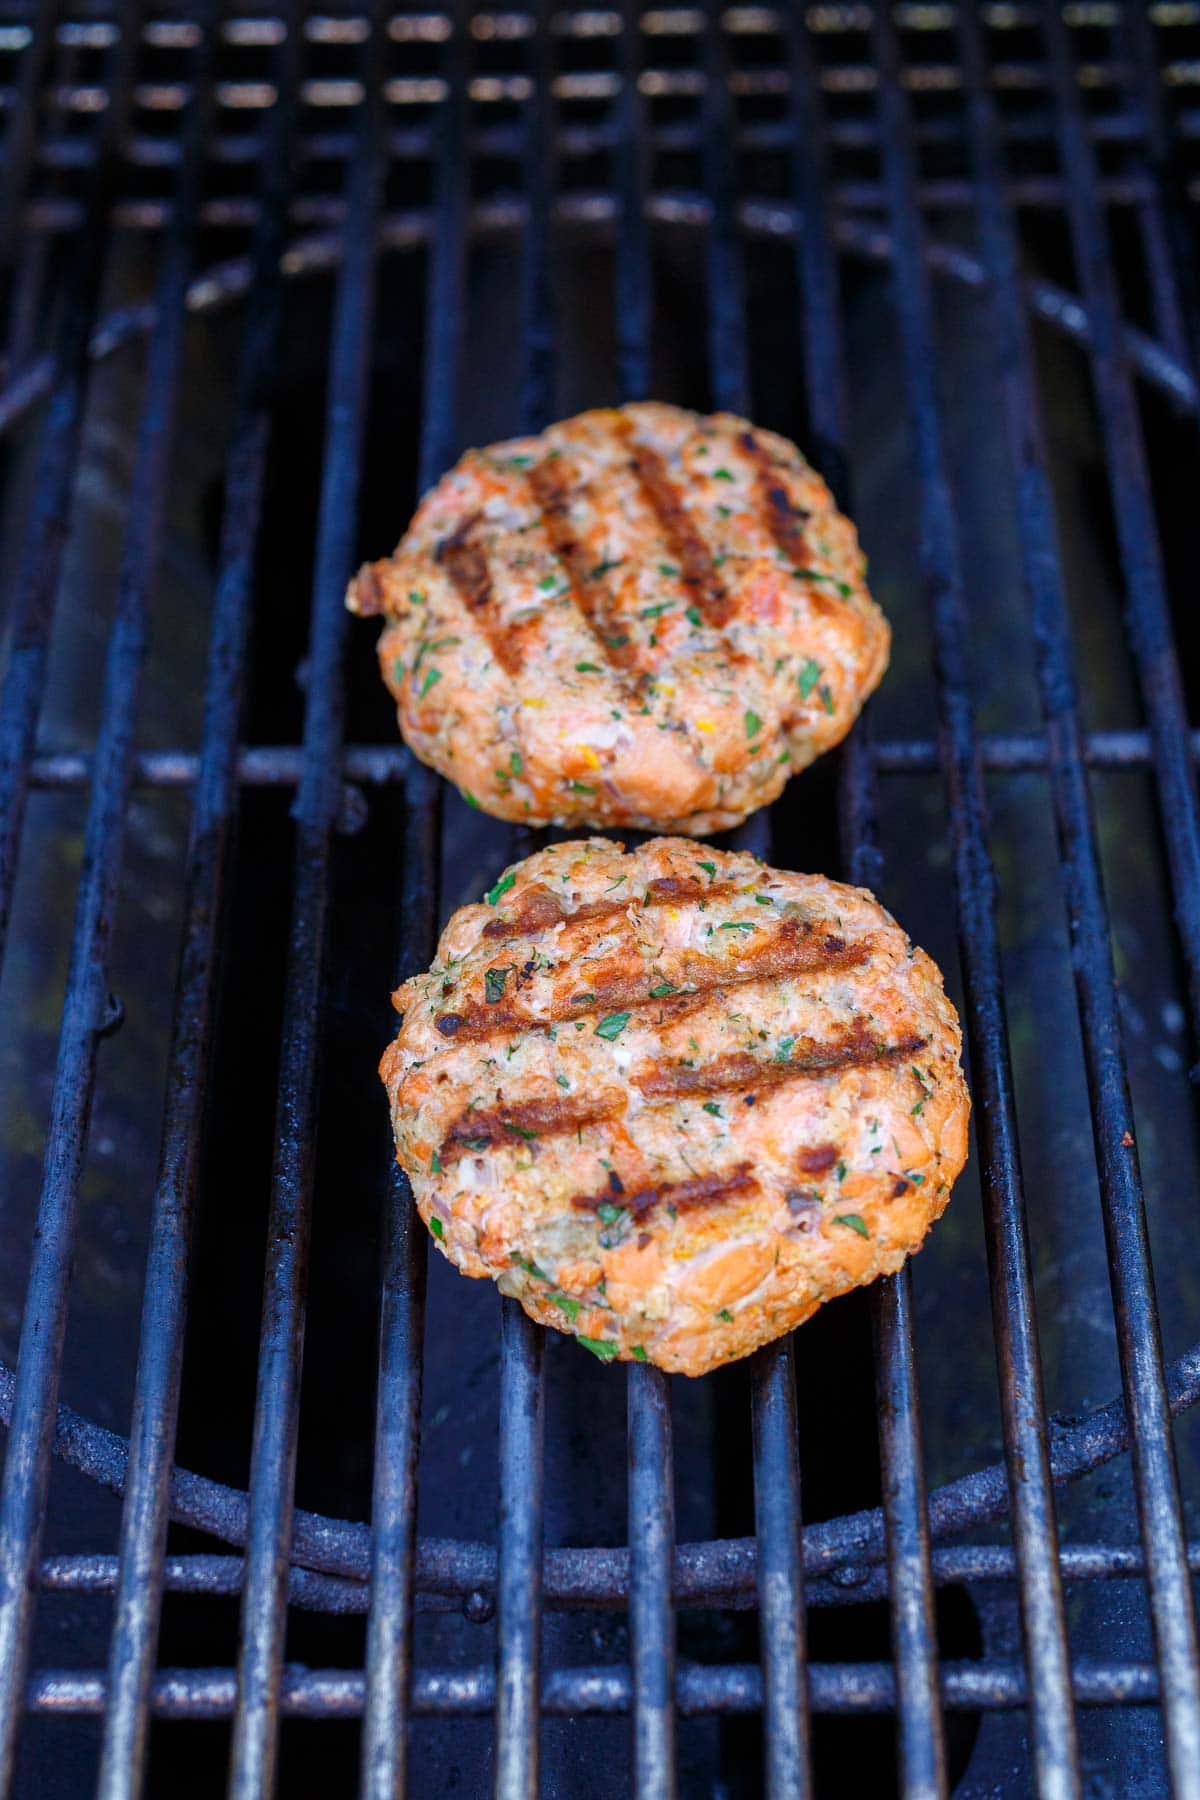 Salmon burgers on the grill.